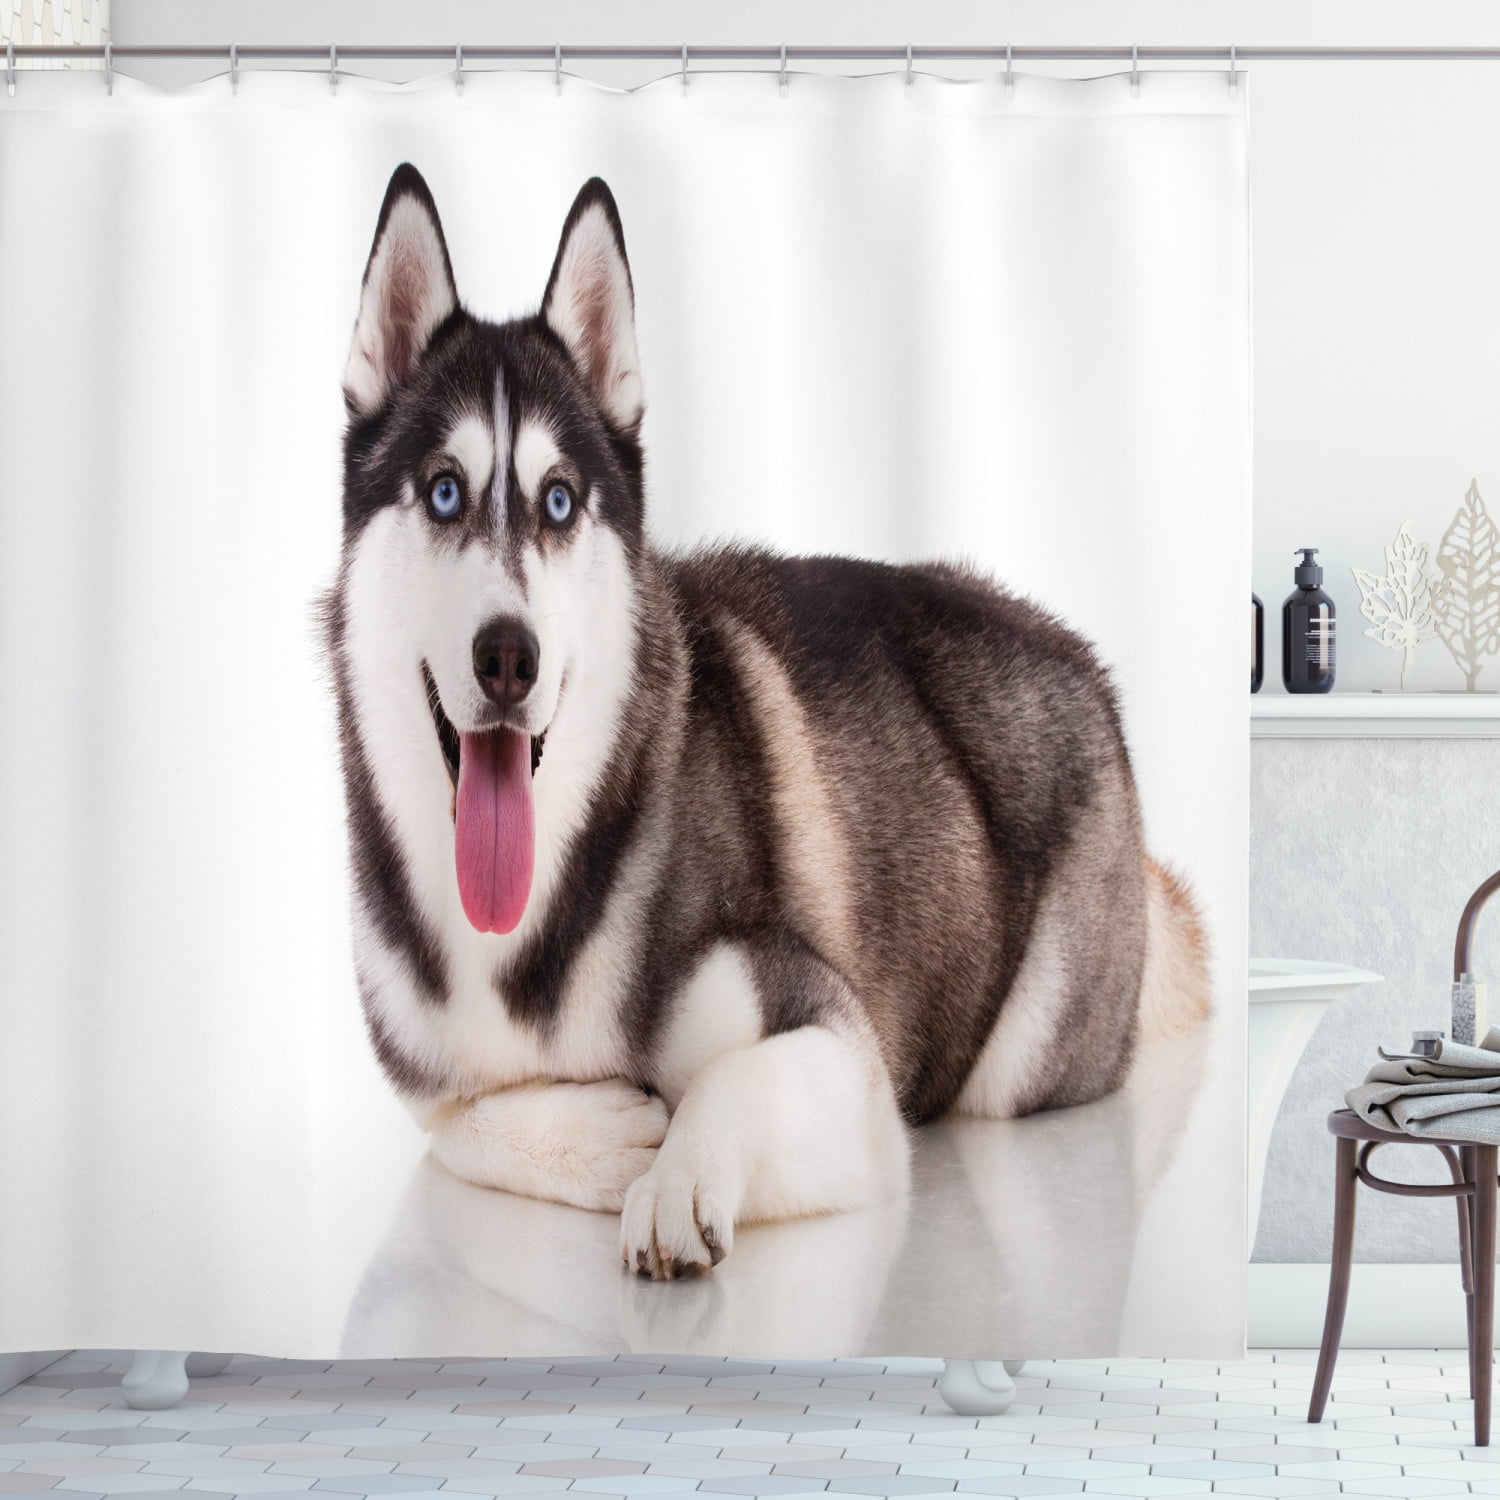 Alaskan Malamute Shower Curtain, Funny Adorable Siberian Dog Blue Eyes  Furry Domestic Canine Image, Fabric Bathroom Set with Hooks, 69W X 84L  Inches Extra Long, Brown Cream White, by Ambesonne 